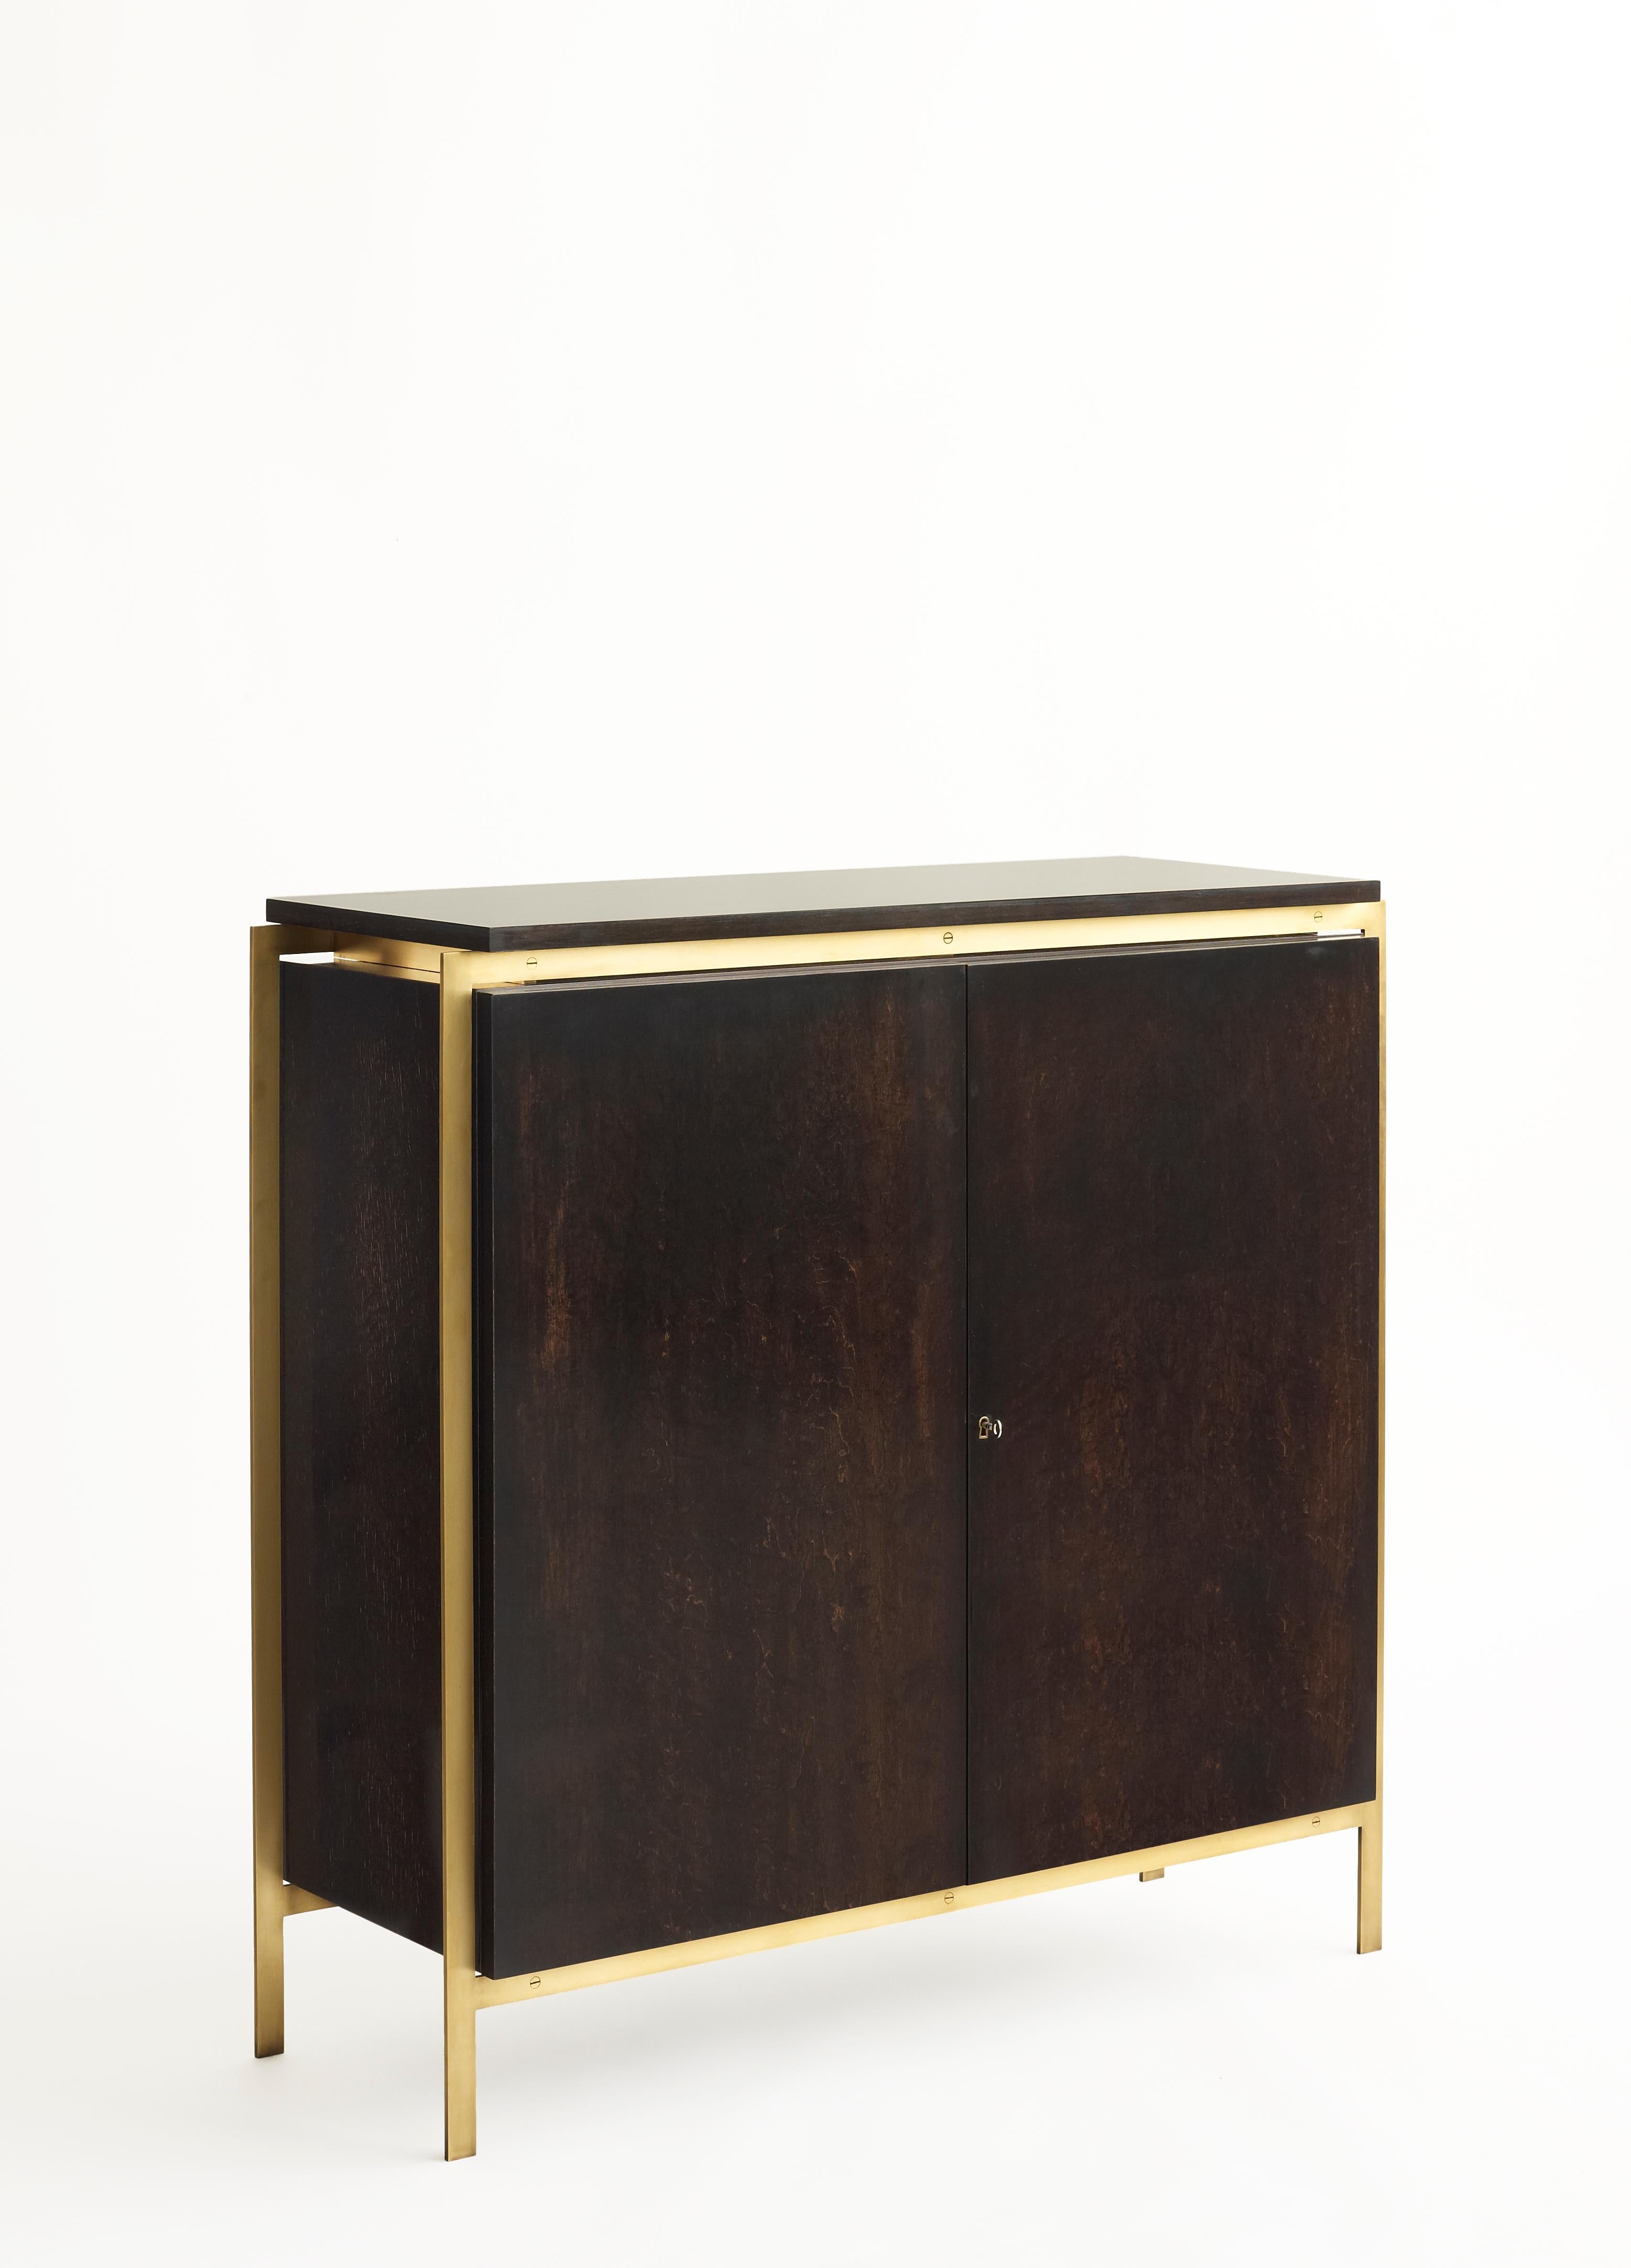 Measurements
38 W x 14 D x 37.5 H inches

Material Specifications
Frame: Blackened oak, walnut, bleached oak, or white lacquer
Metal: Brushed brass, blackened brass, bronze, brushed nickel

Notes
Finishes and dimensions may be customized.